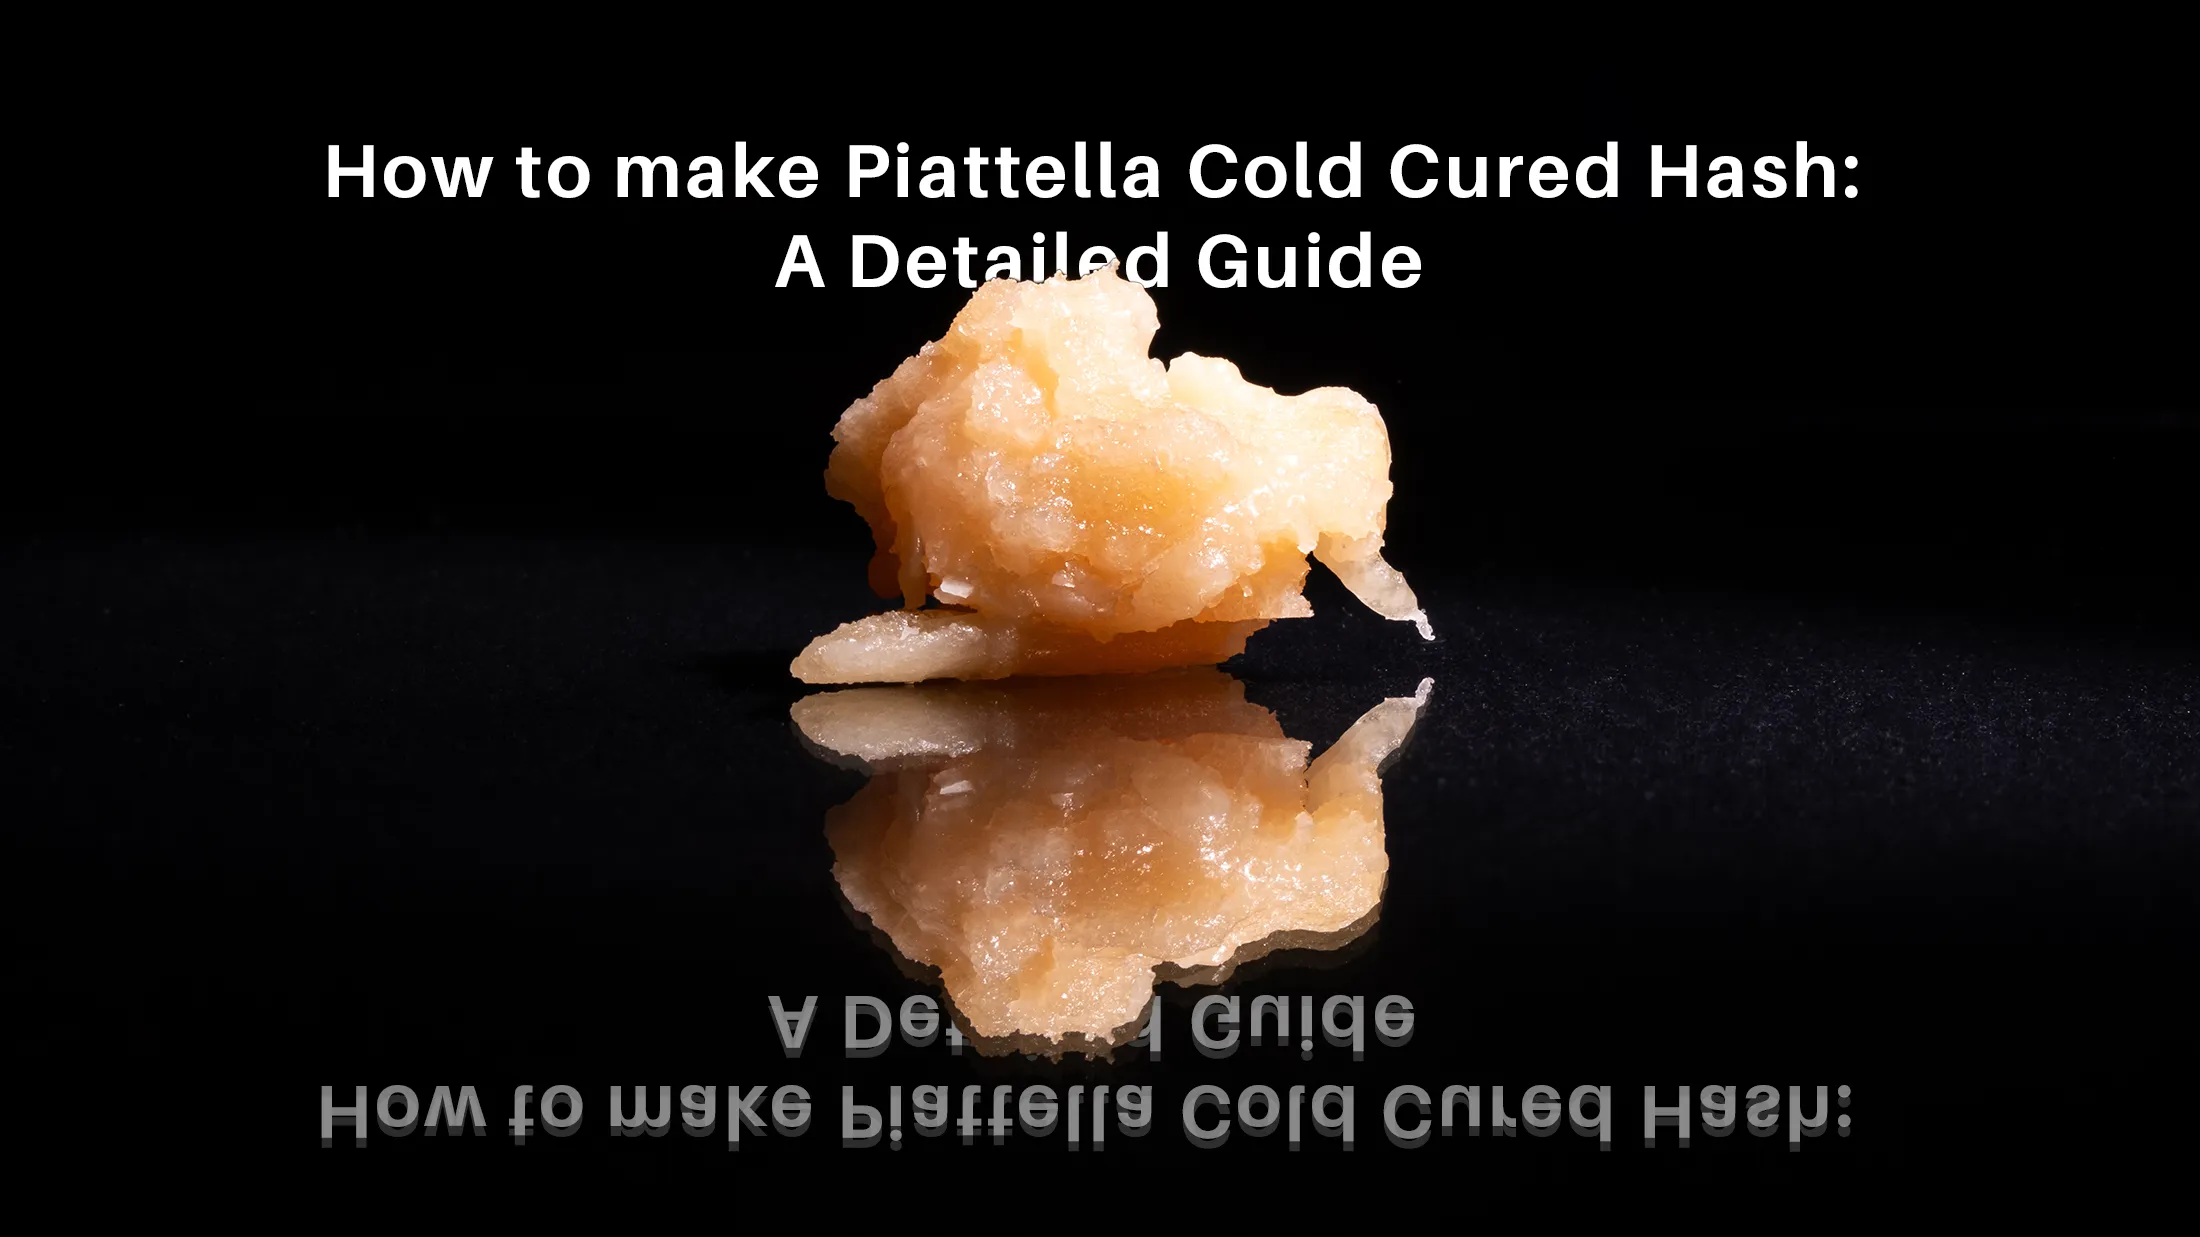 How to Make Piattella Cold Cured Hash: A Detailed Guide